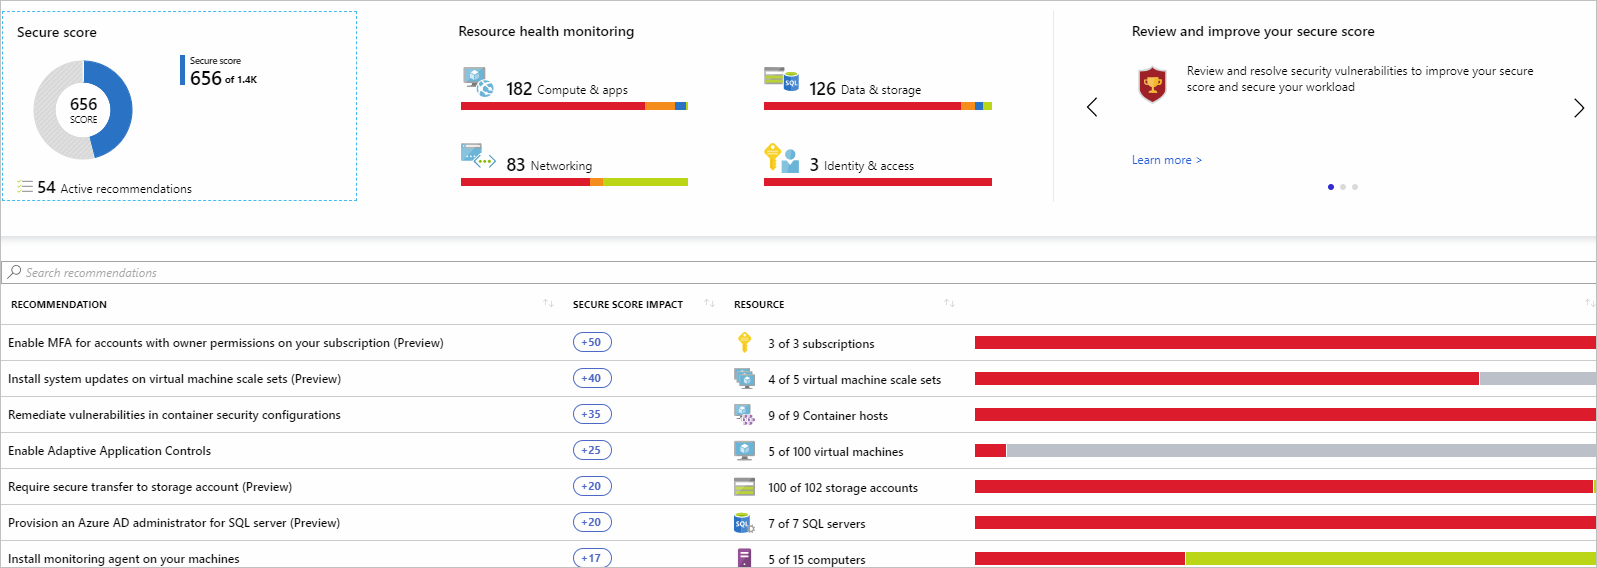 Azure Security Center helps meet CMMC Risk Management and Security Awareness requirements